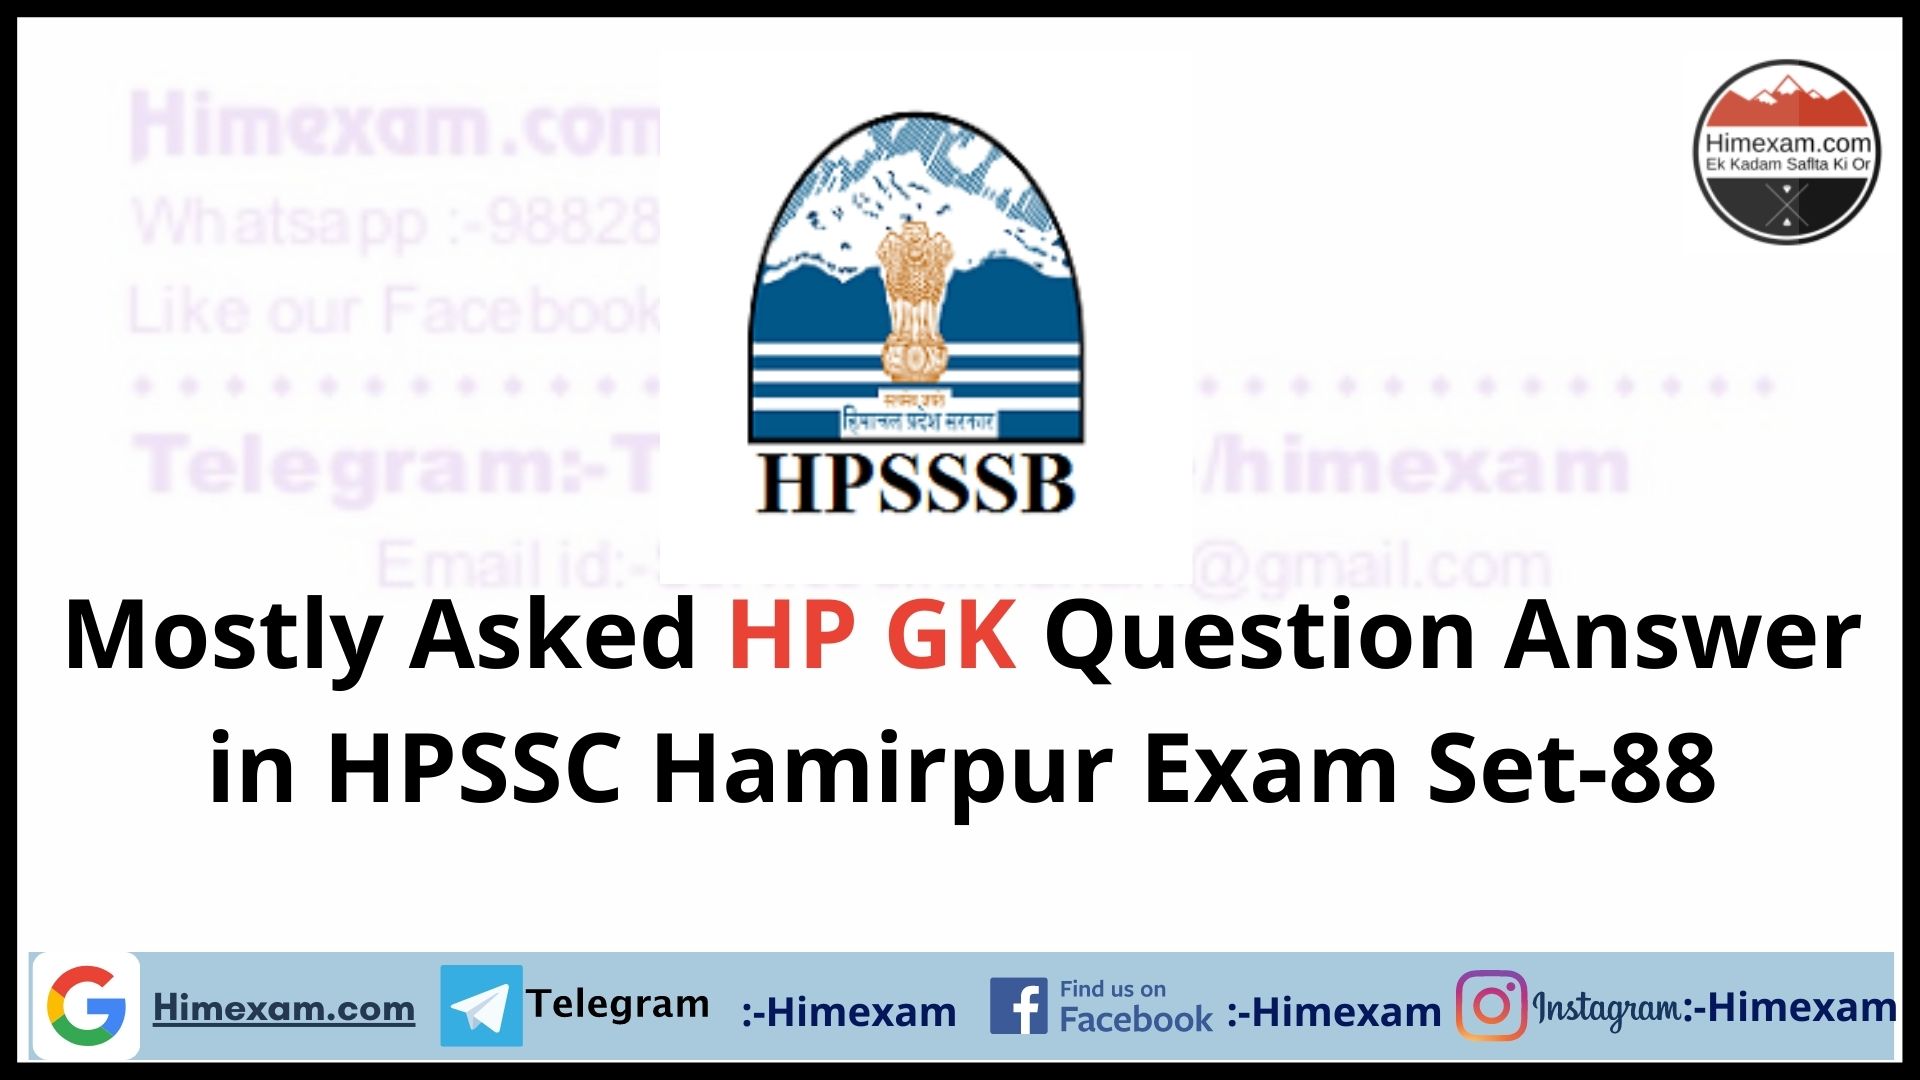 Mostly Asked HP GK Question Answer in HPSSC Hamirpur Exam Set-88